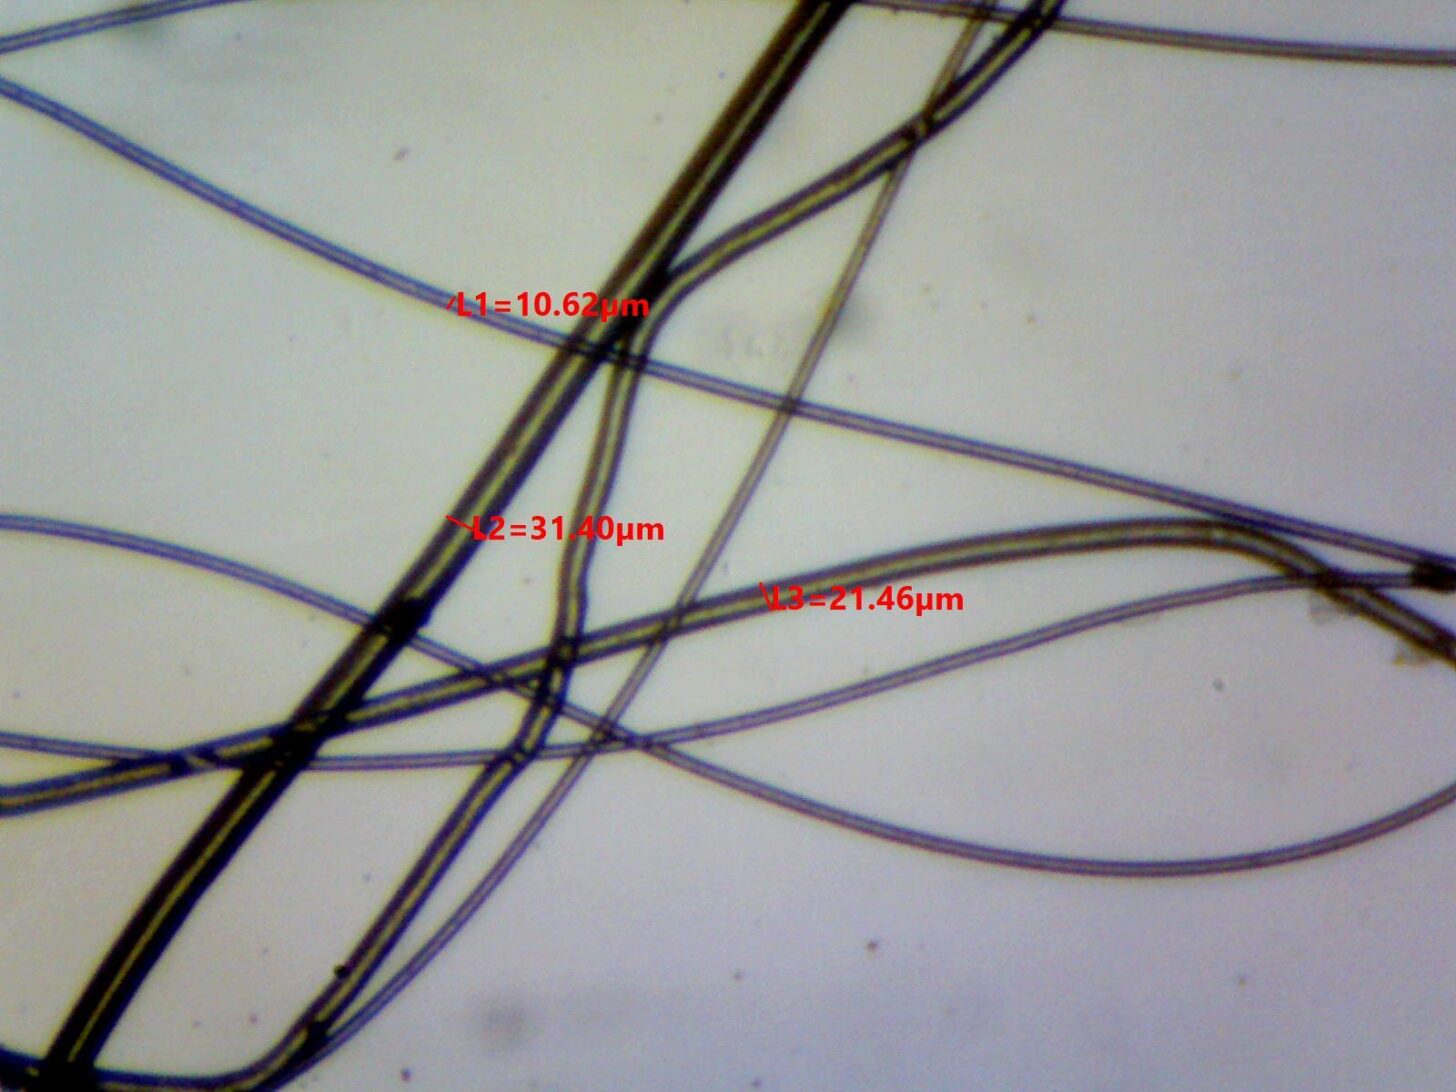 Primaloft Gold 6 osy Photomicrograph showing fiber diameter measurements of 10.62, 21.46, and 31.40 microns.